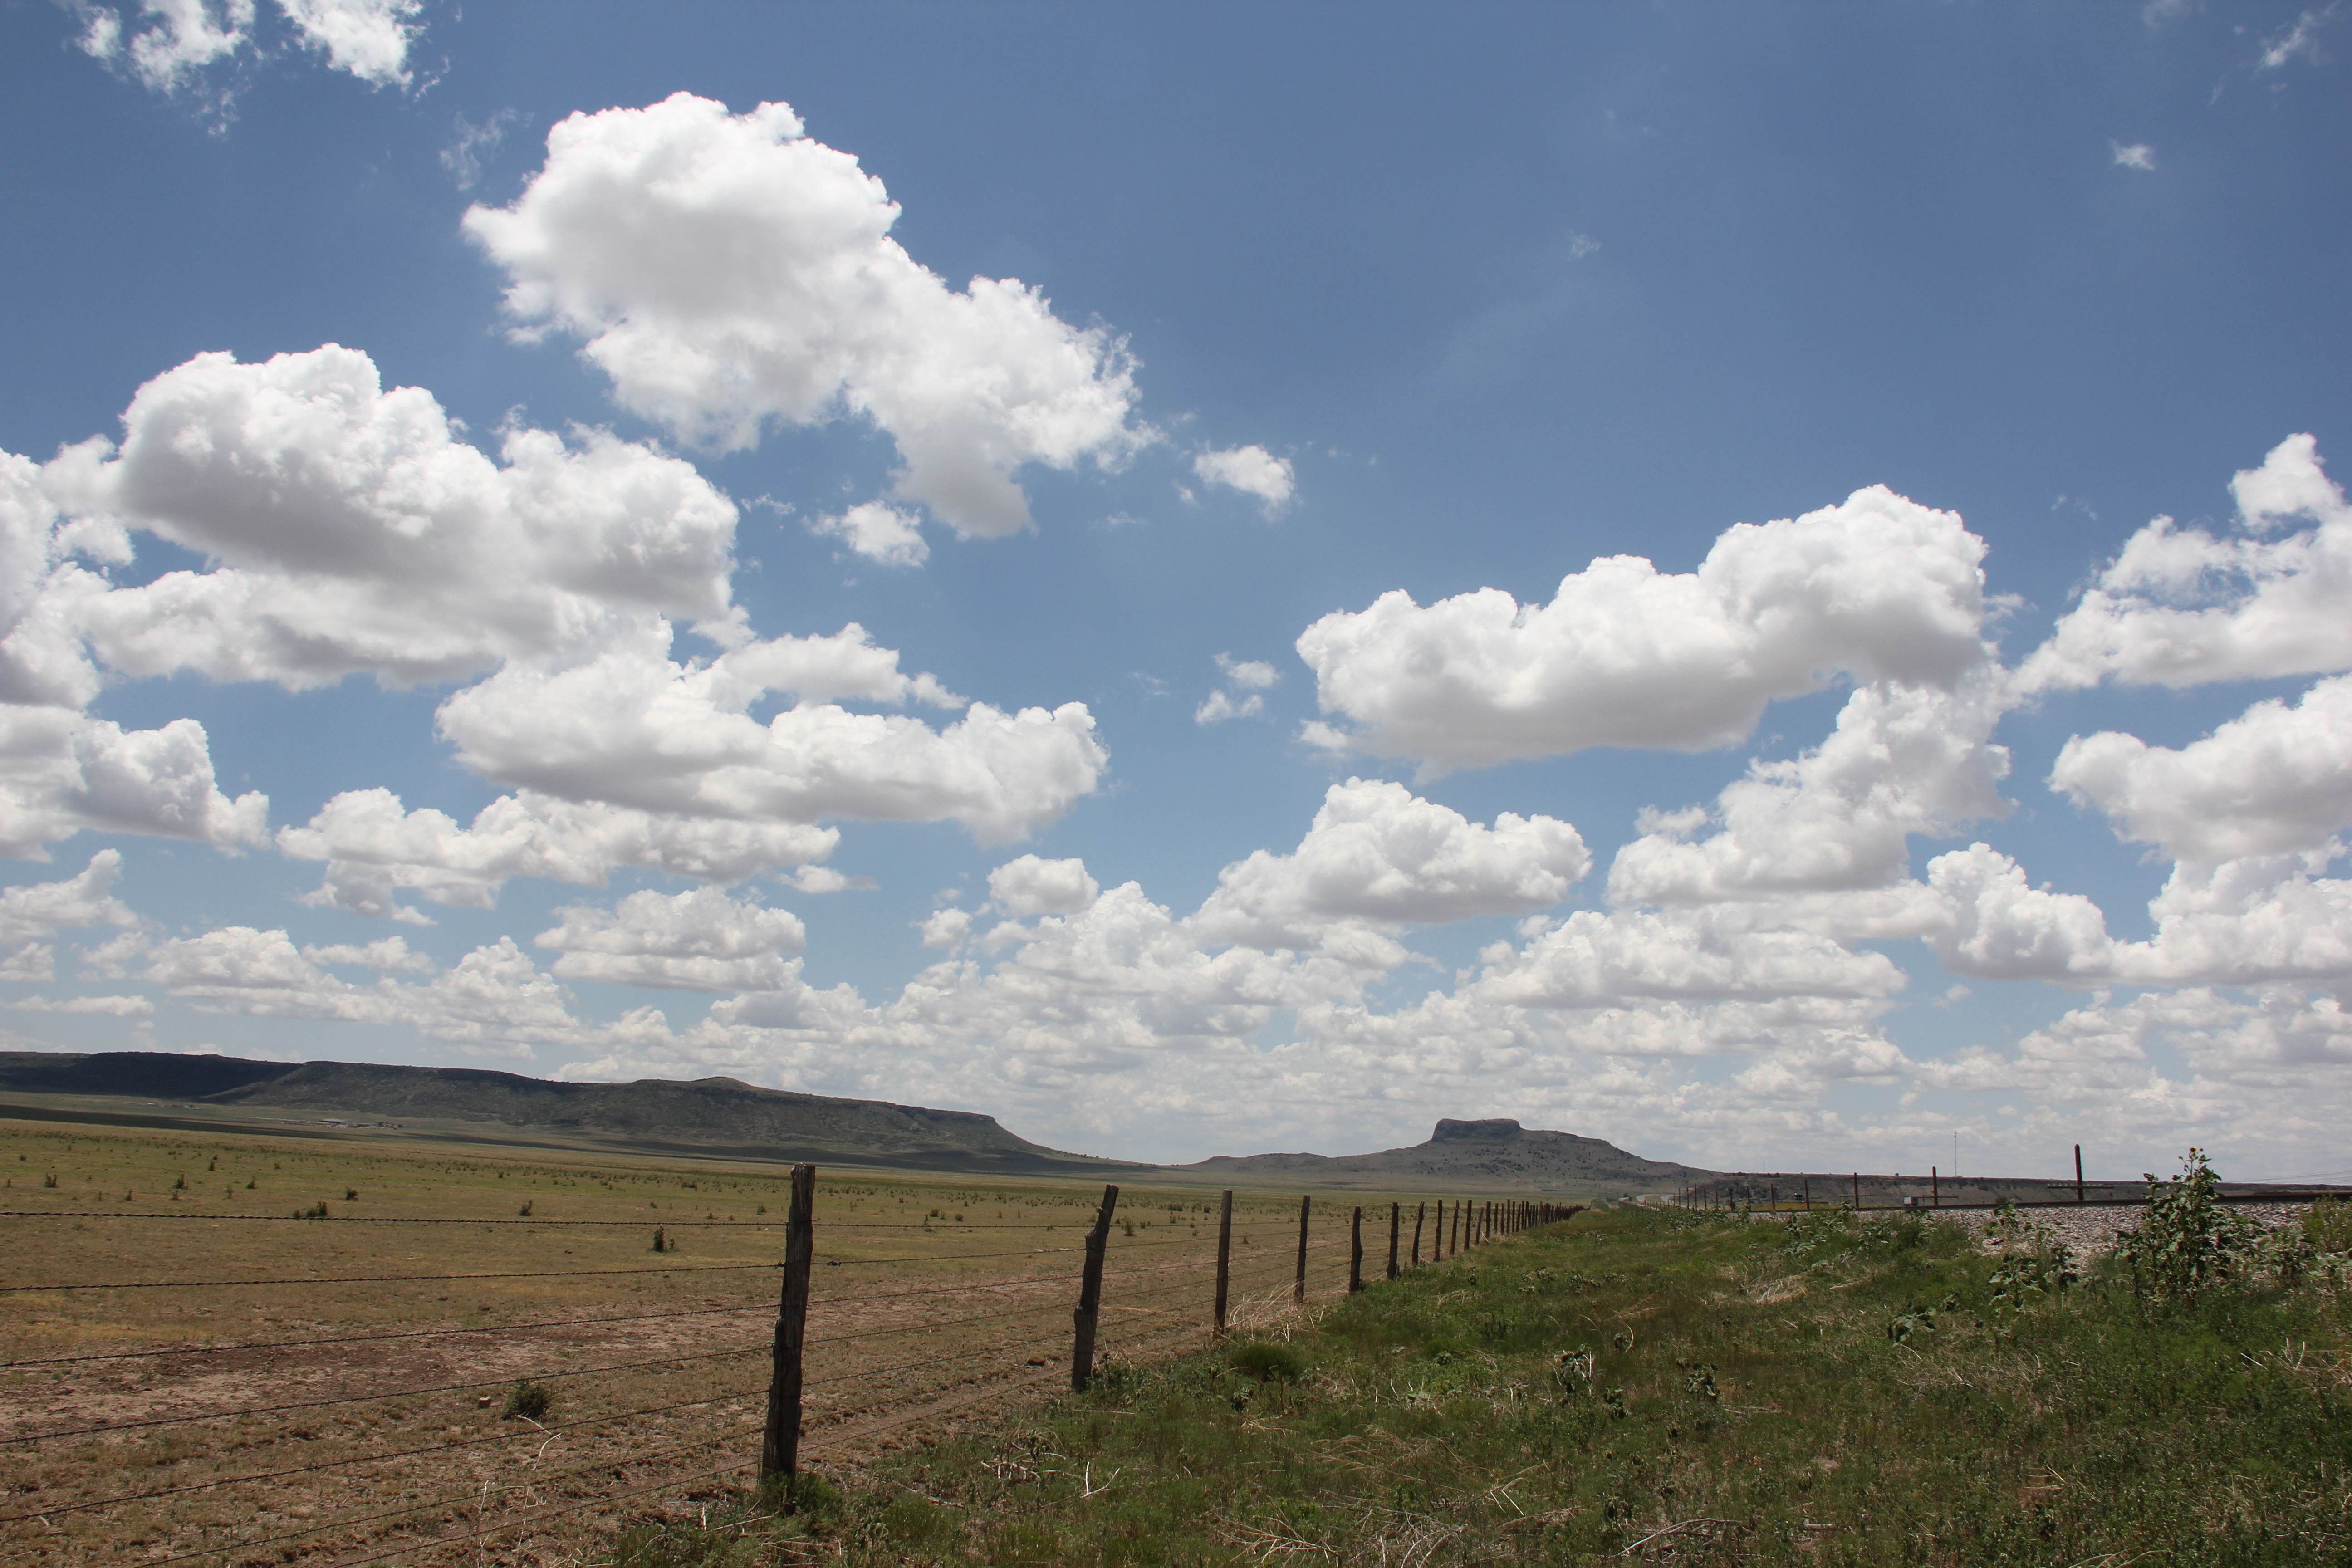 New Mexico cattle fences